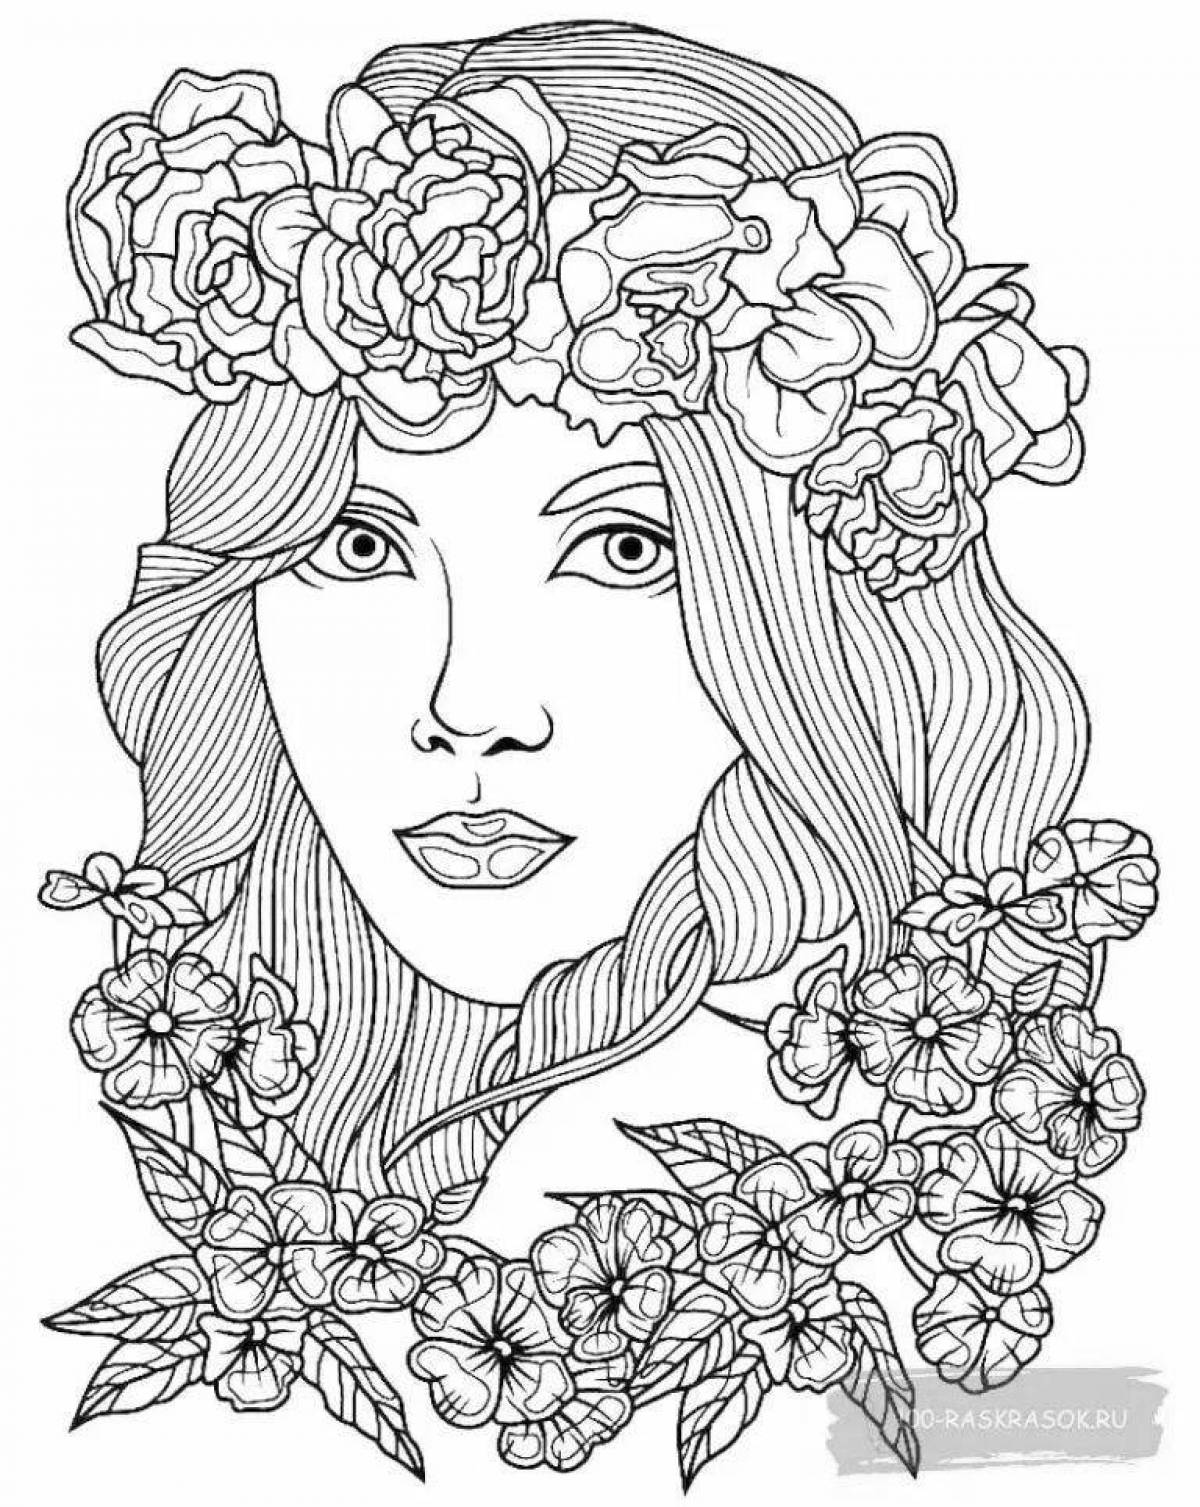 Fun coloring girl with flowers